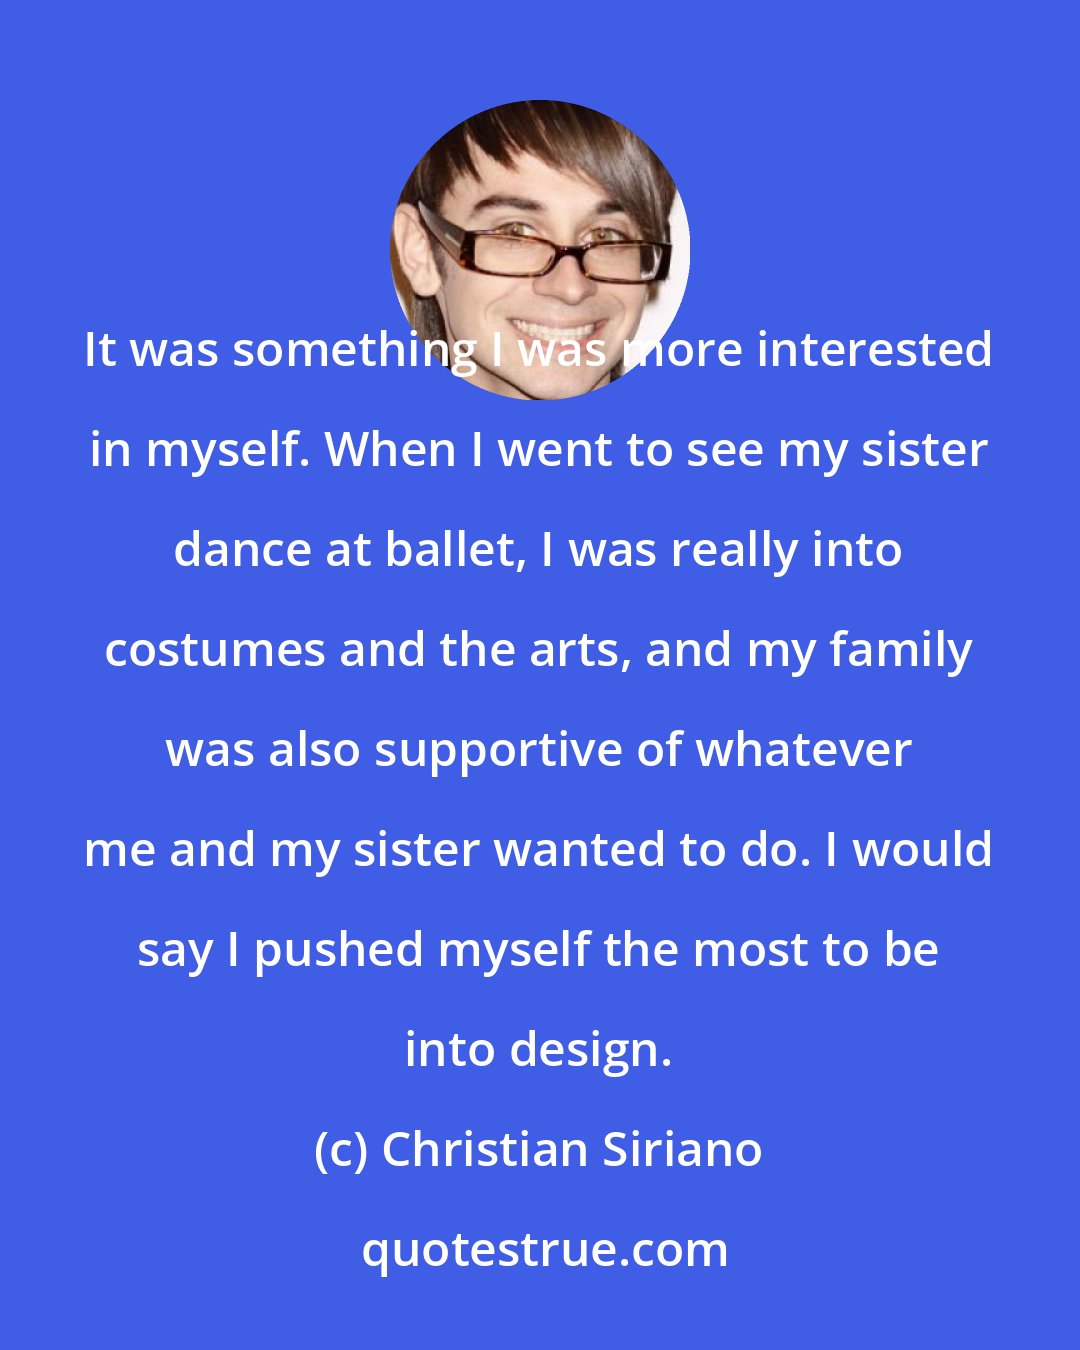 Christian Siriano: It was something I was more interested in myself. When I went to see my sister dance at ballet, I was really into costumes and the arts, and my family was also supportive of whatever me and my sister wanted to do. I would say I pushed myself the most to be into design.